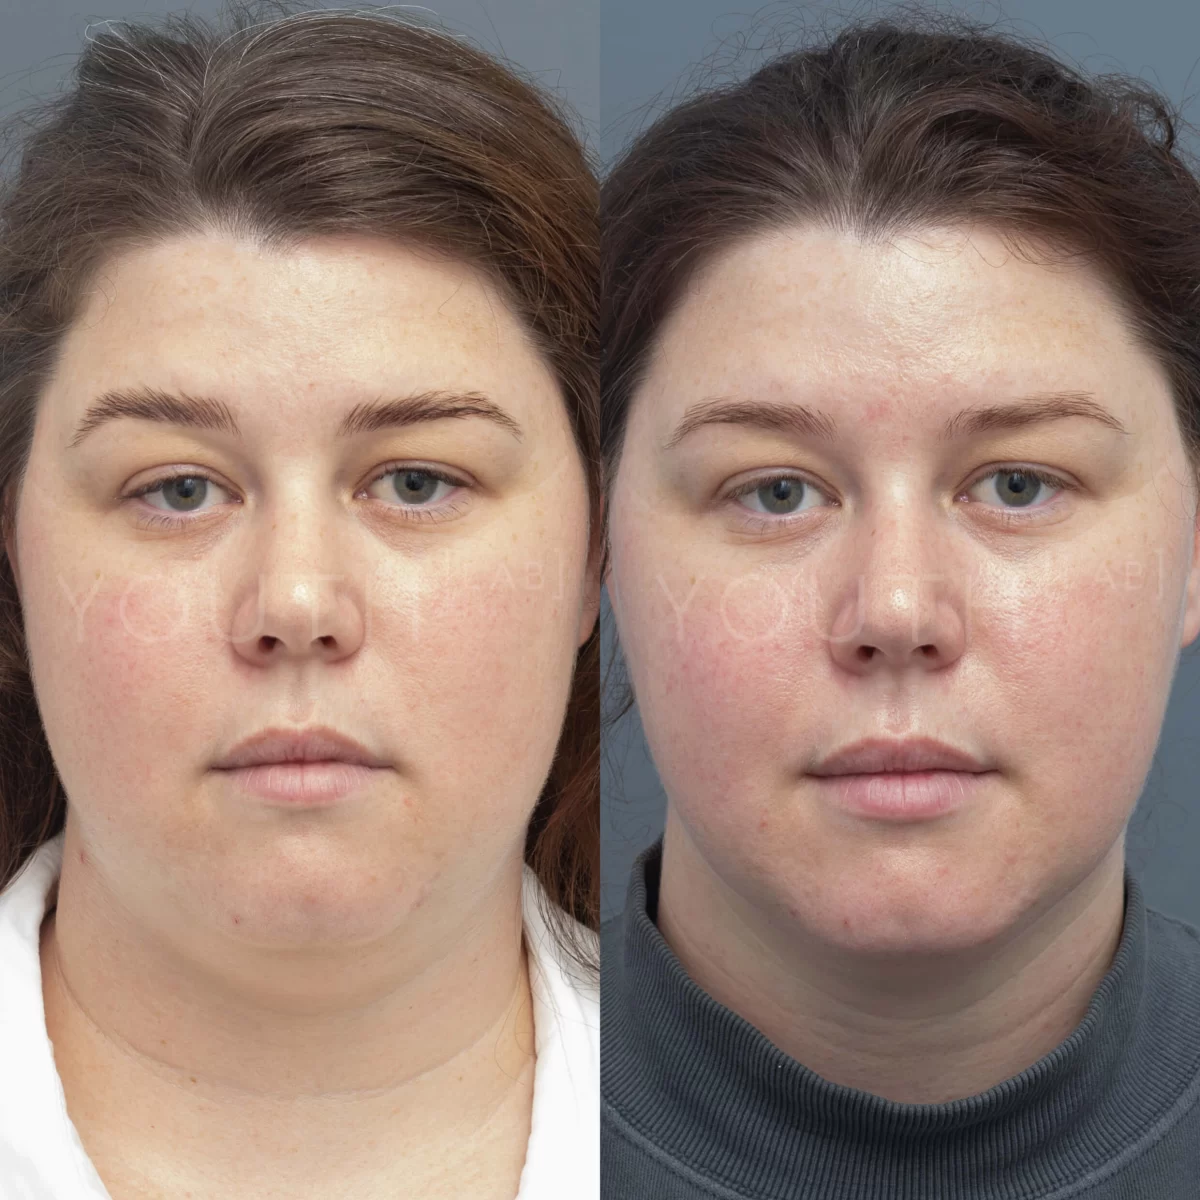 Jawline slimming results